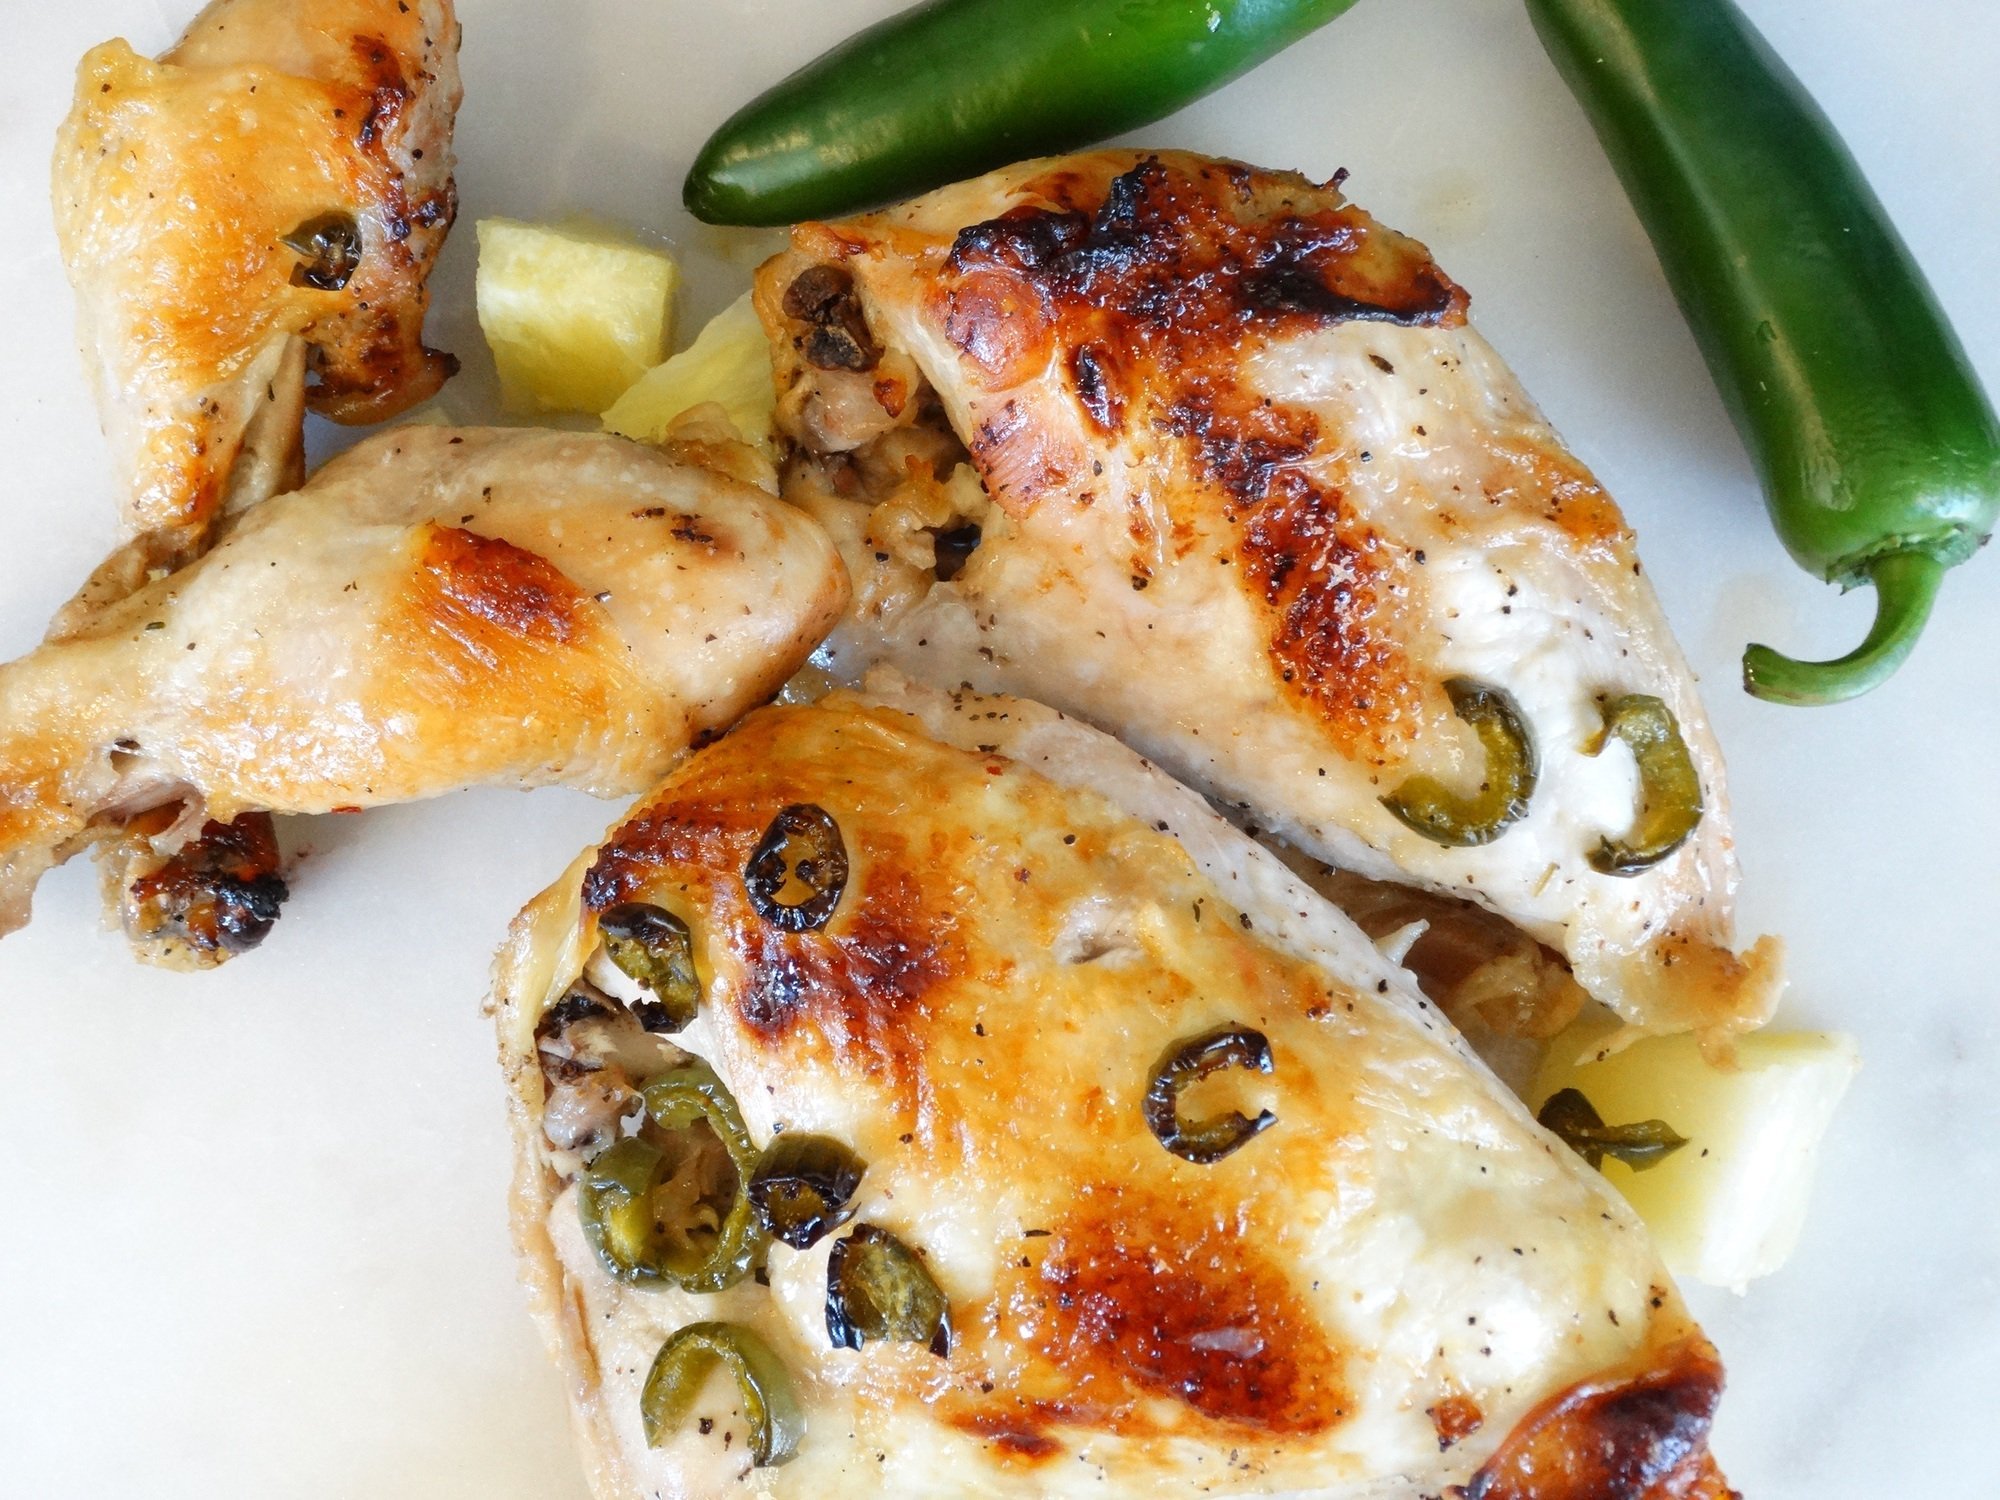 https://www.thatorganicmom.com/wp-content/uploads/2019/02/caribbean-chicken-recipe-use-a-meat-thermometer-4.jpg